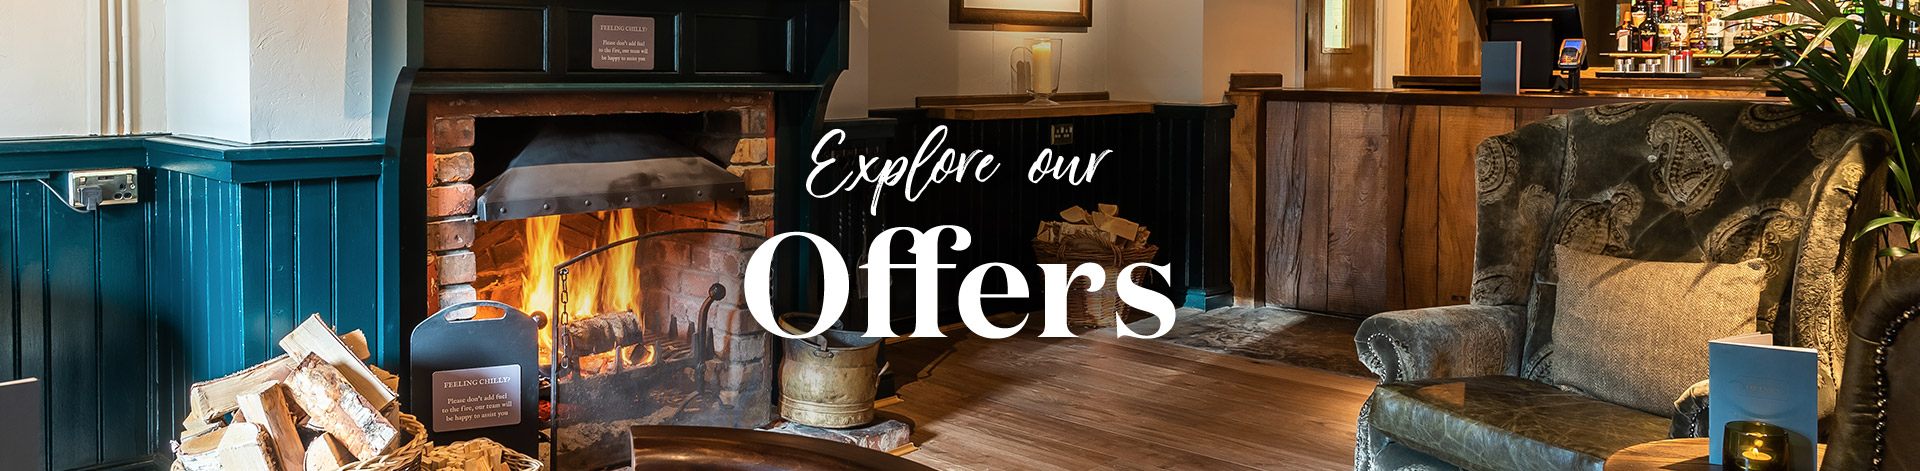 Our latest offers at The Aperfield Inn